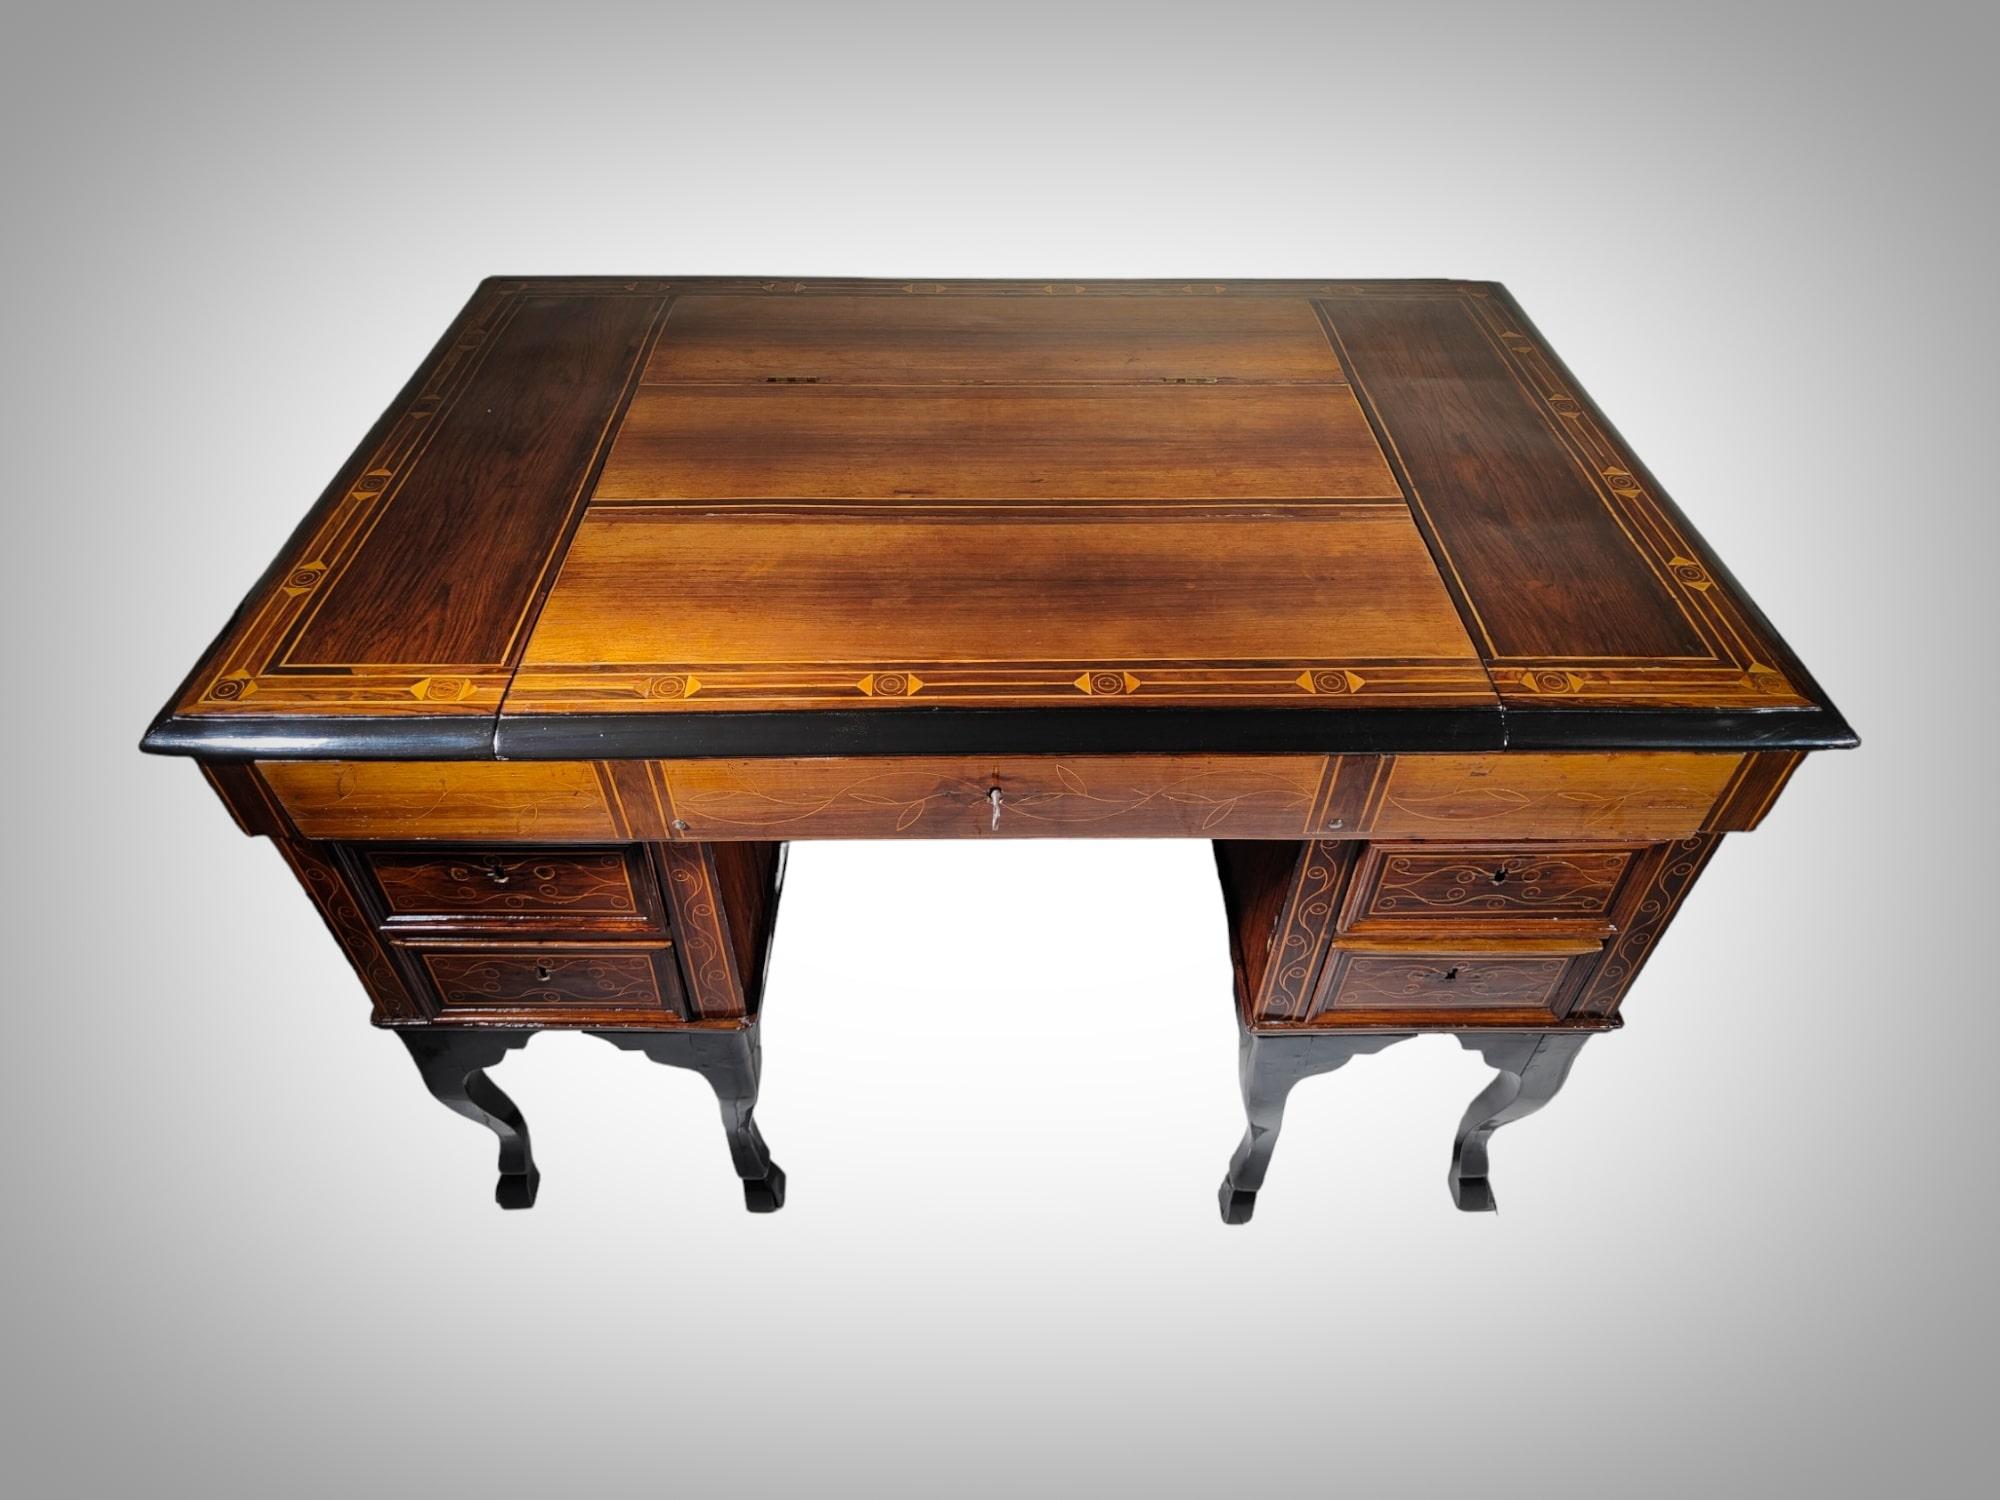 Wood Philippe V Desk From the 17th Century For Sale